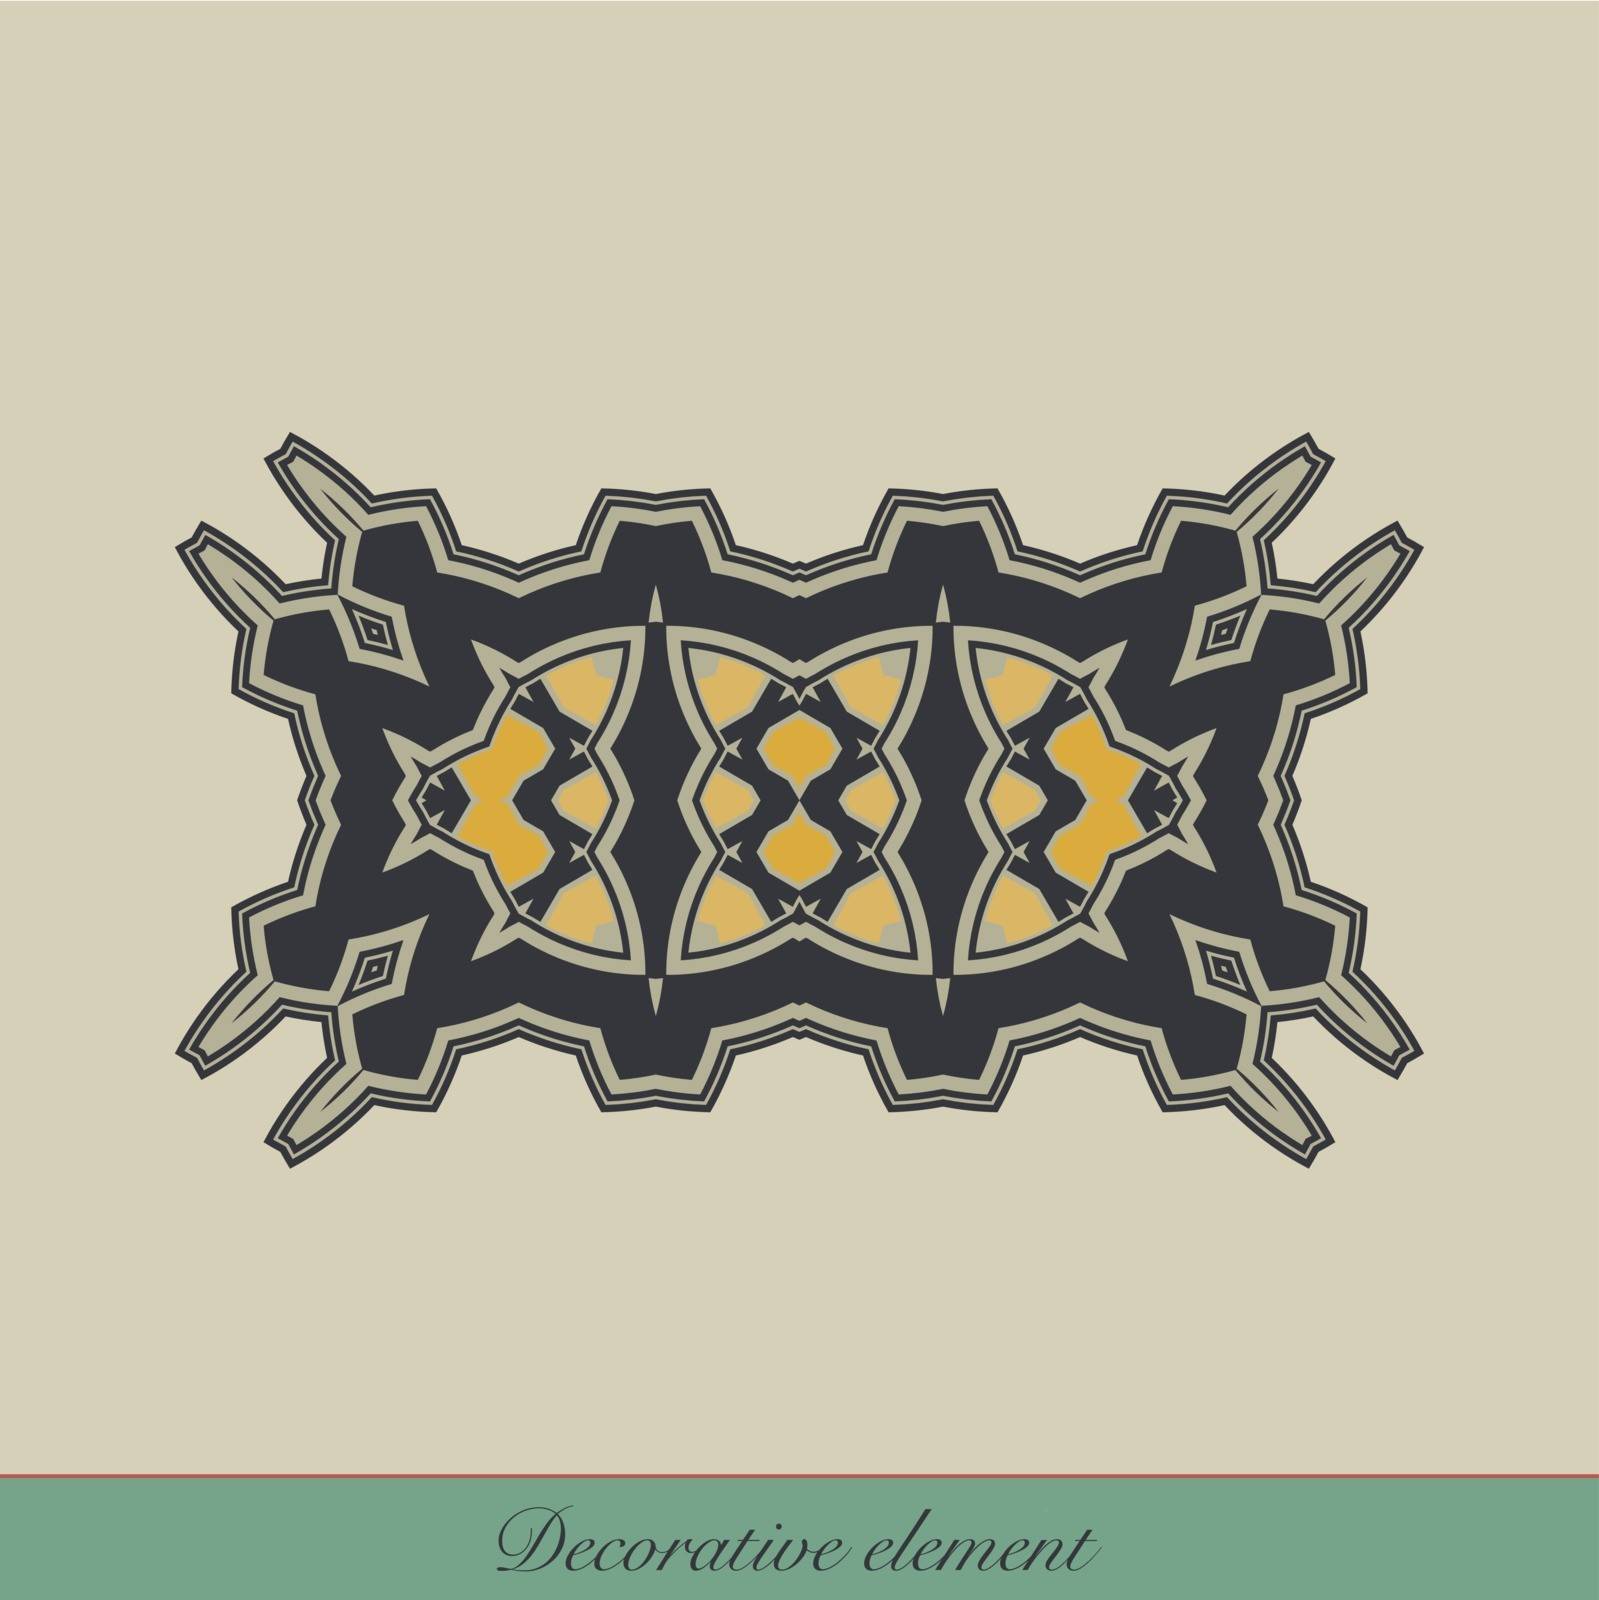 Decorative element by th12